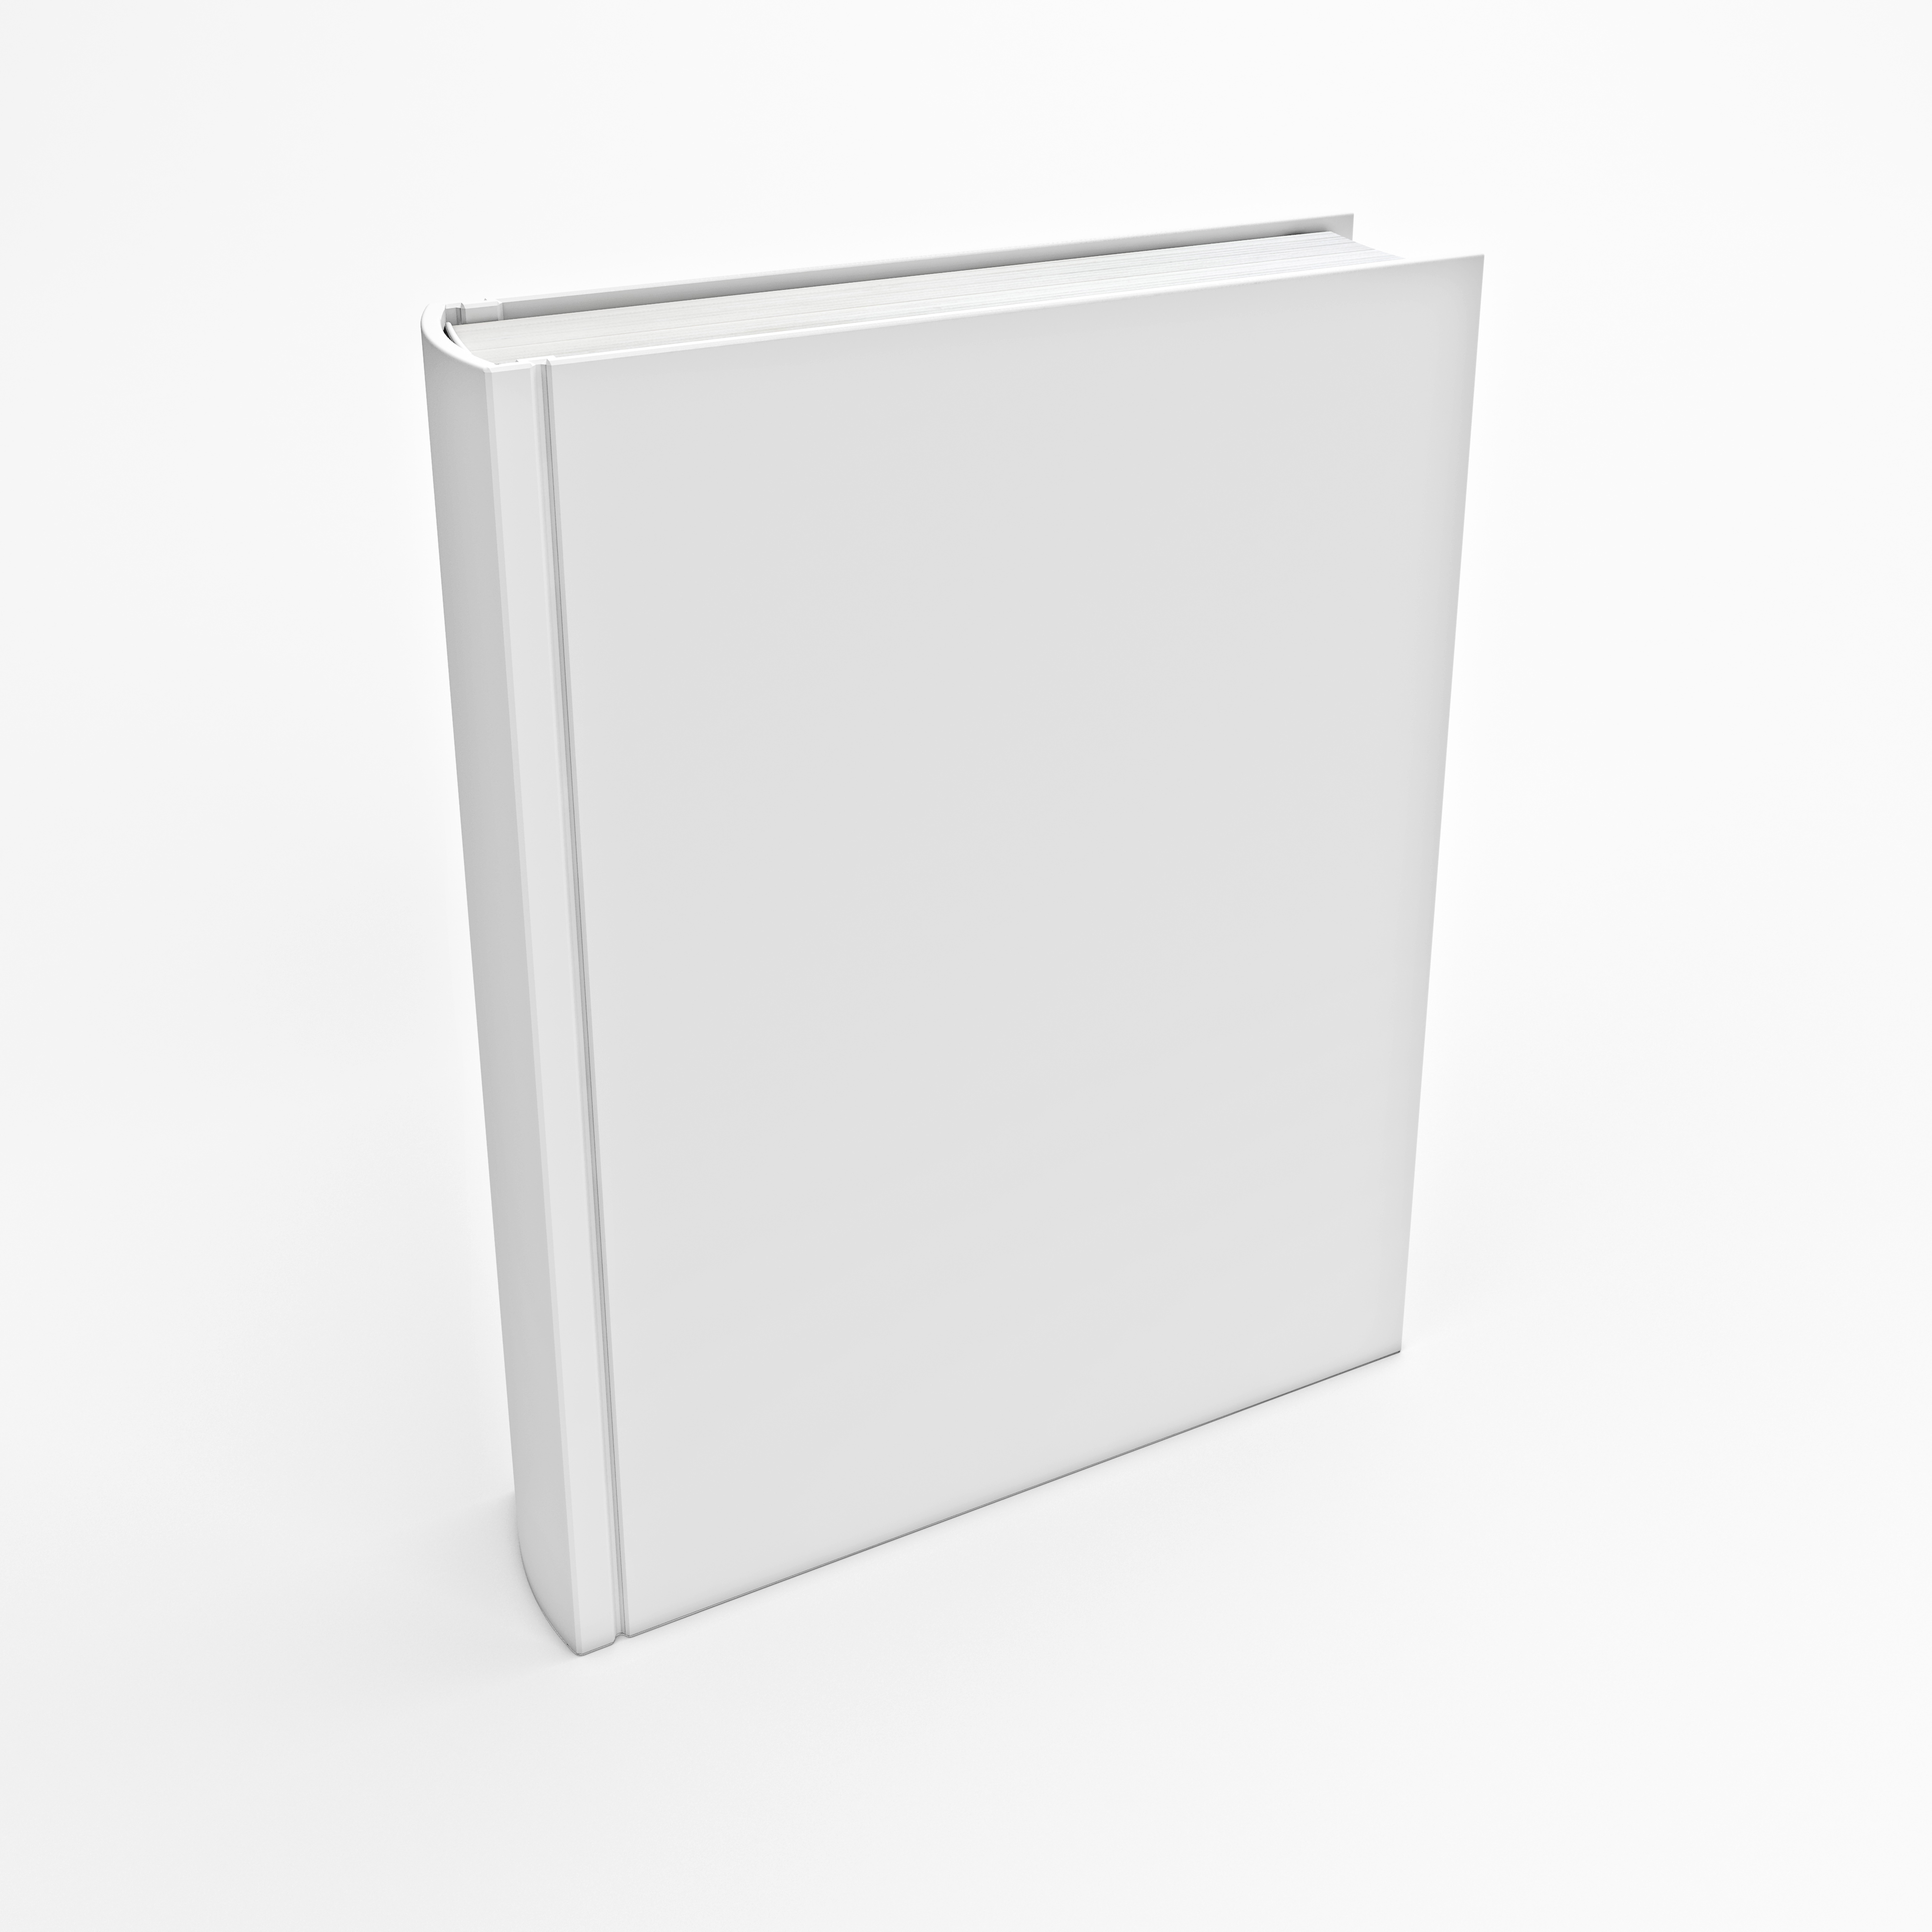 blank book cover clipart - photo #26